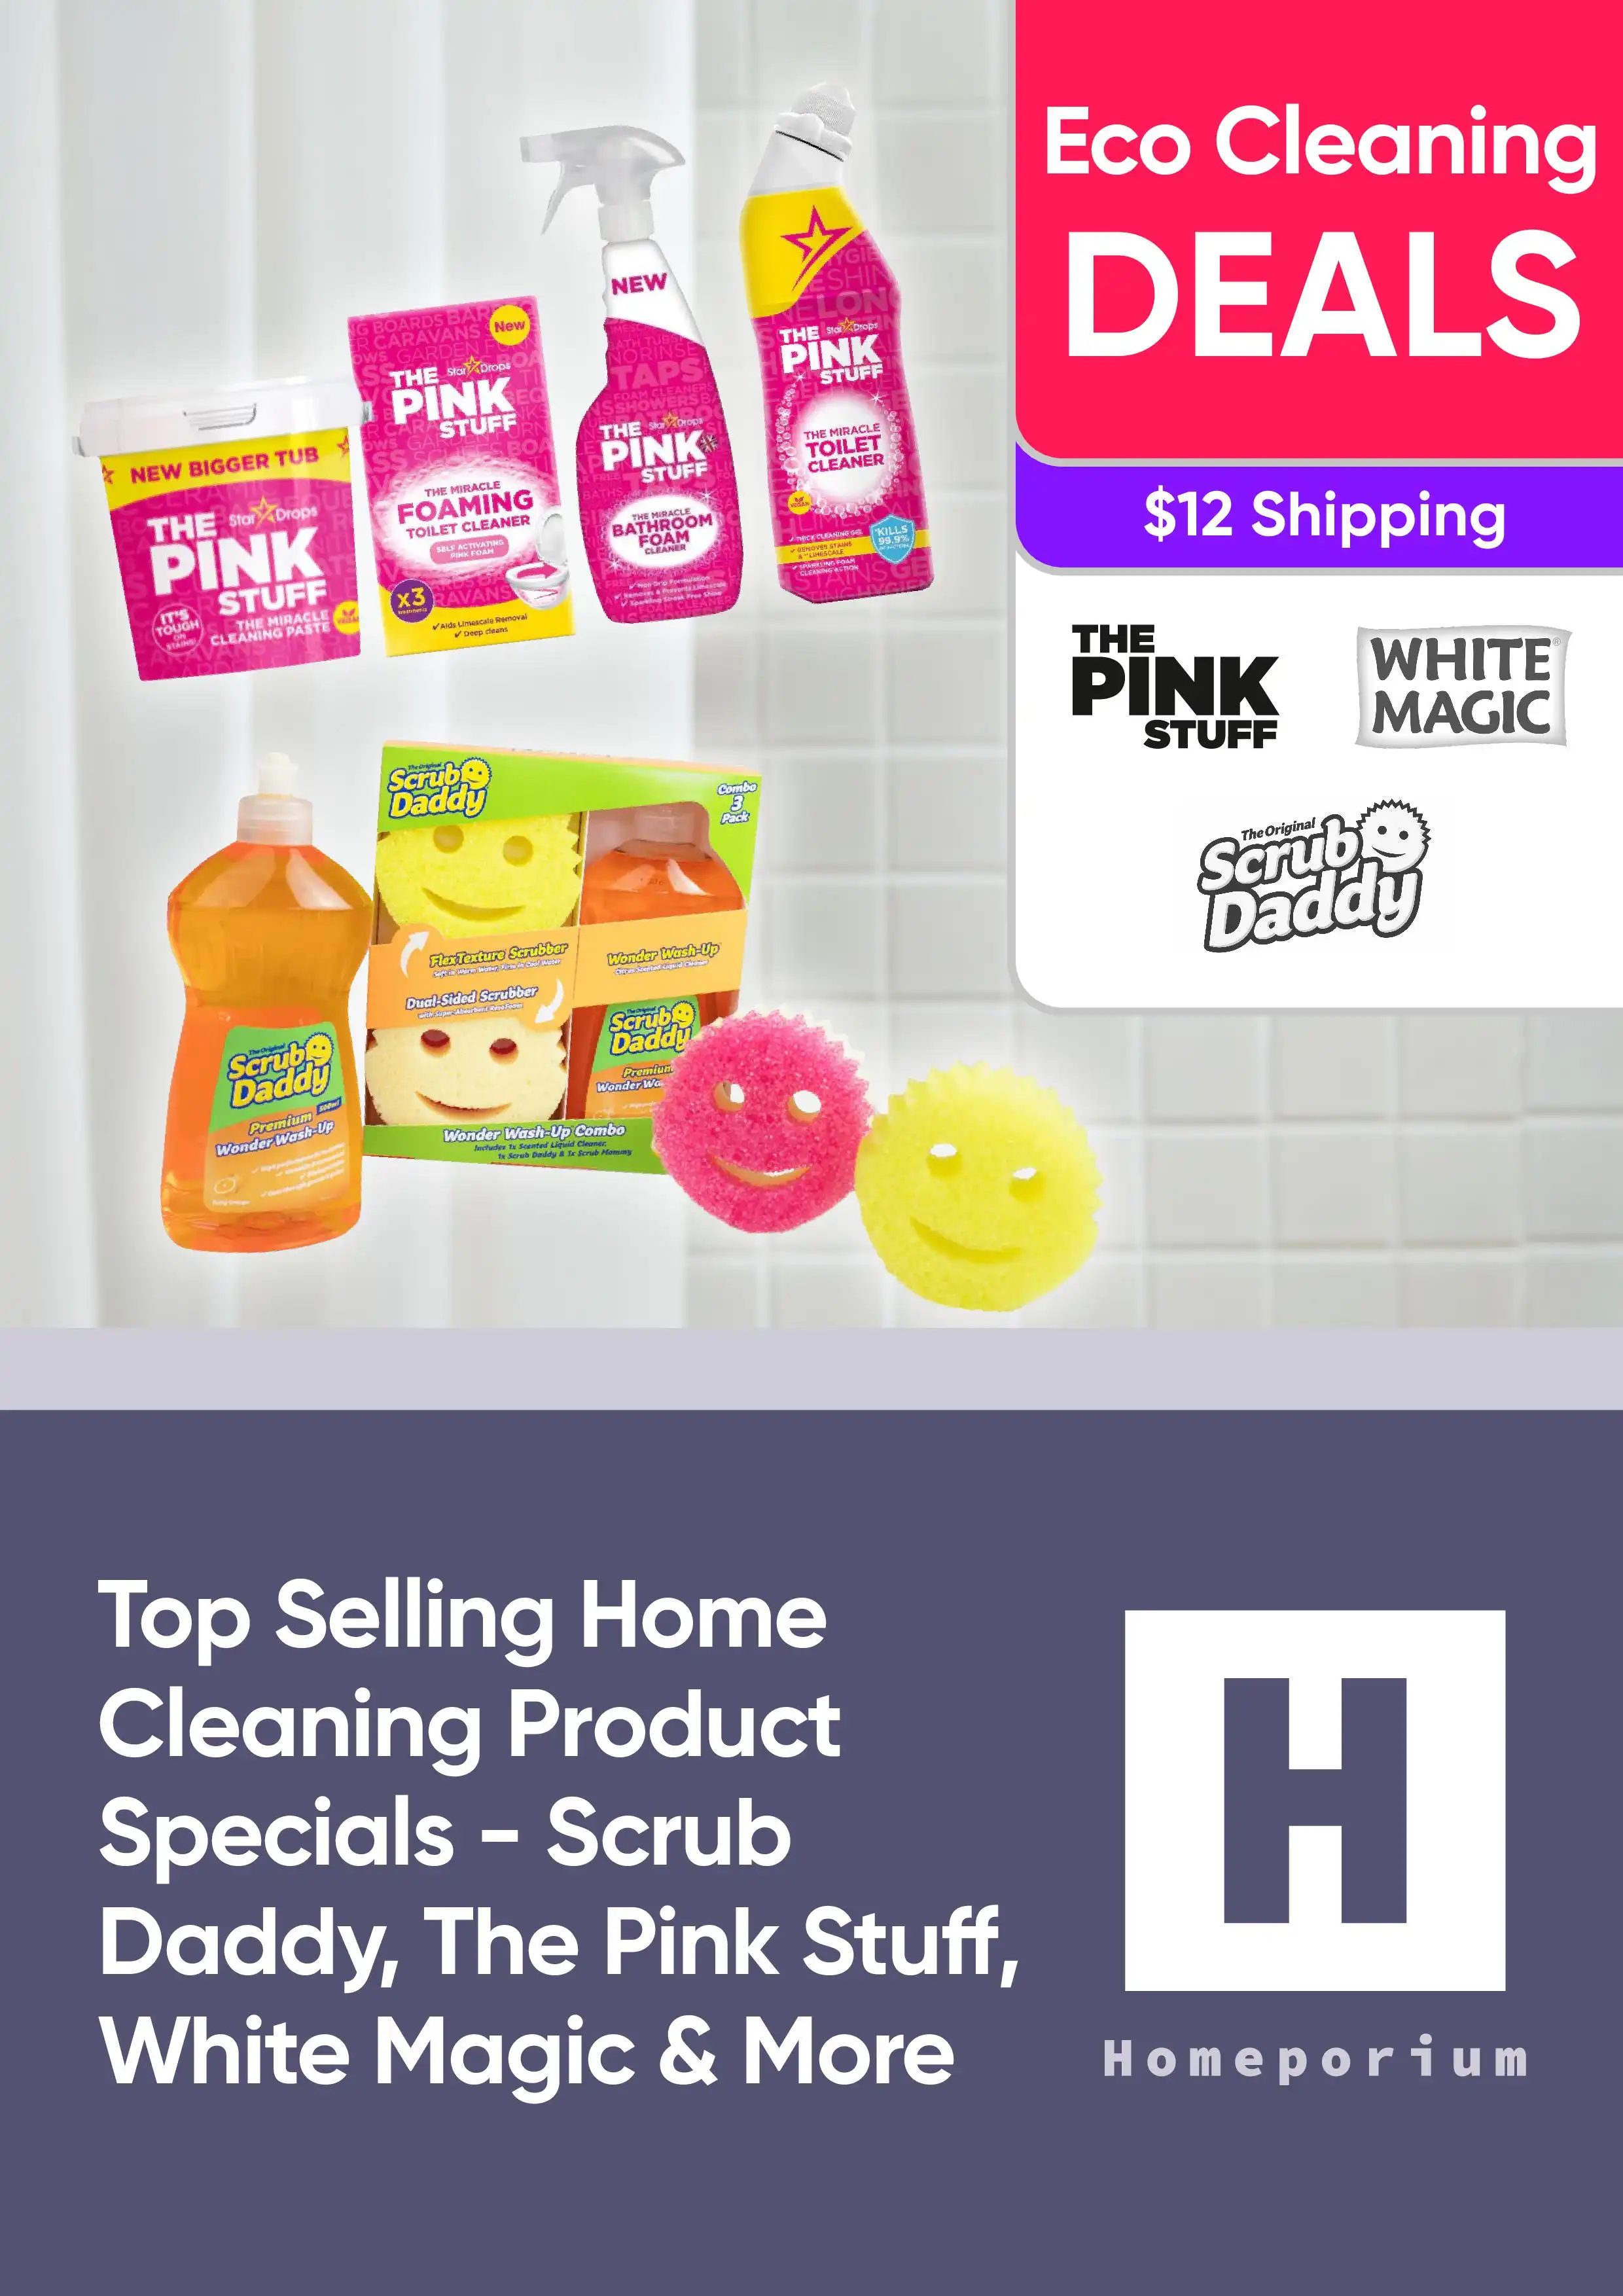 Top Selling Home Cleaning Products Specials - Scrub Daddy, The Pink Stuff, White Magic